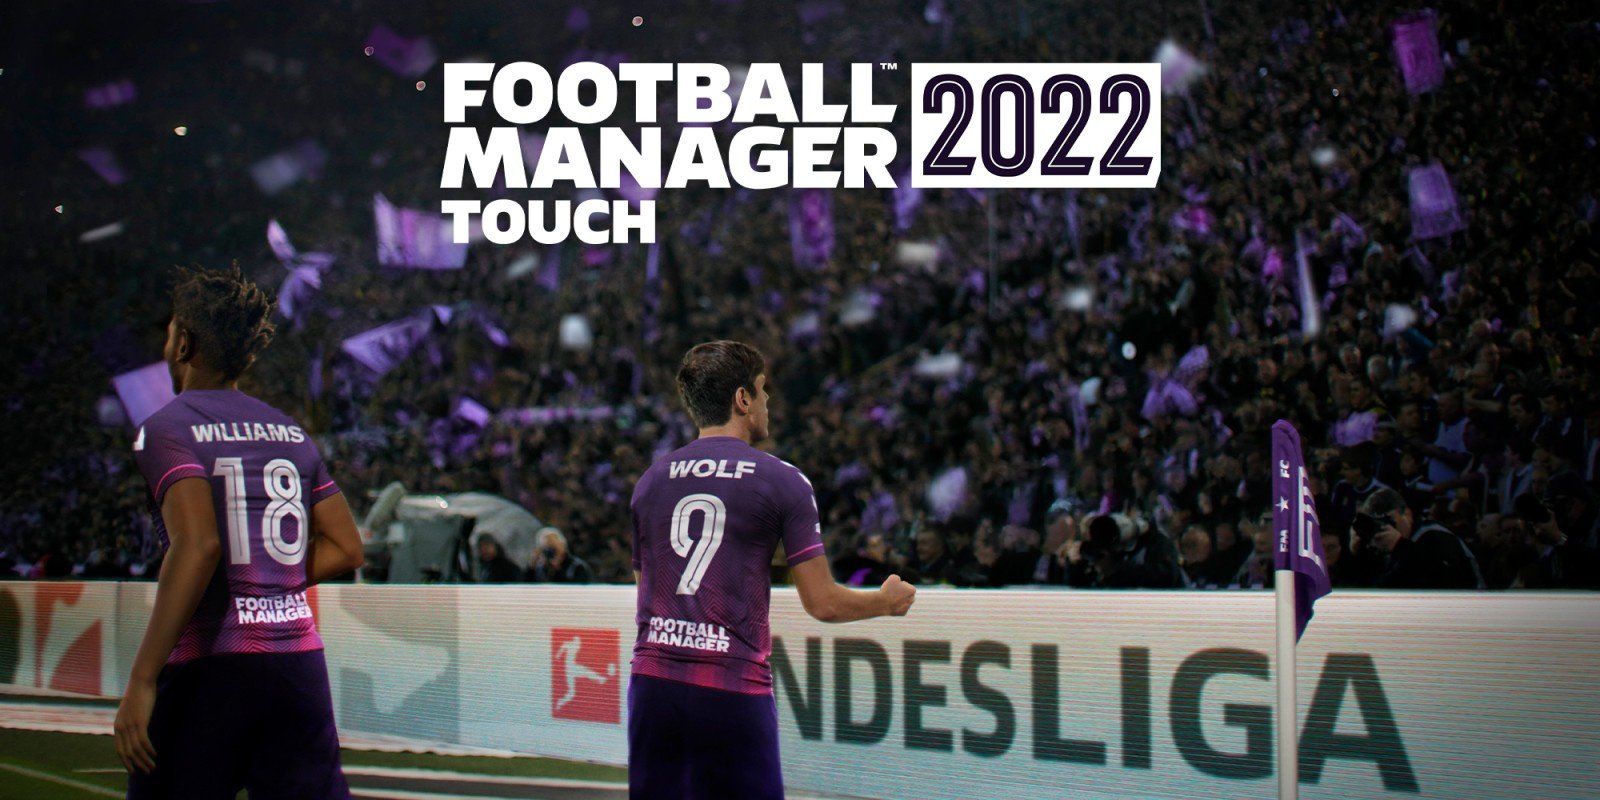 Nintendo eShop features FM 2022 Touch in their new Most Played